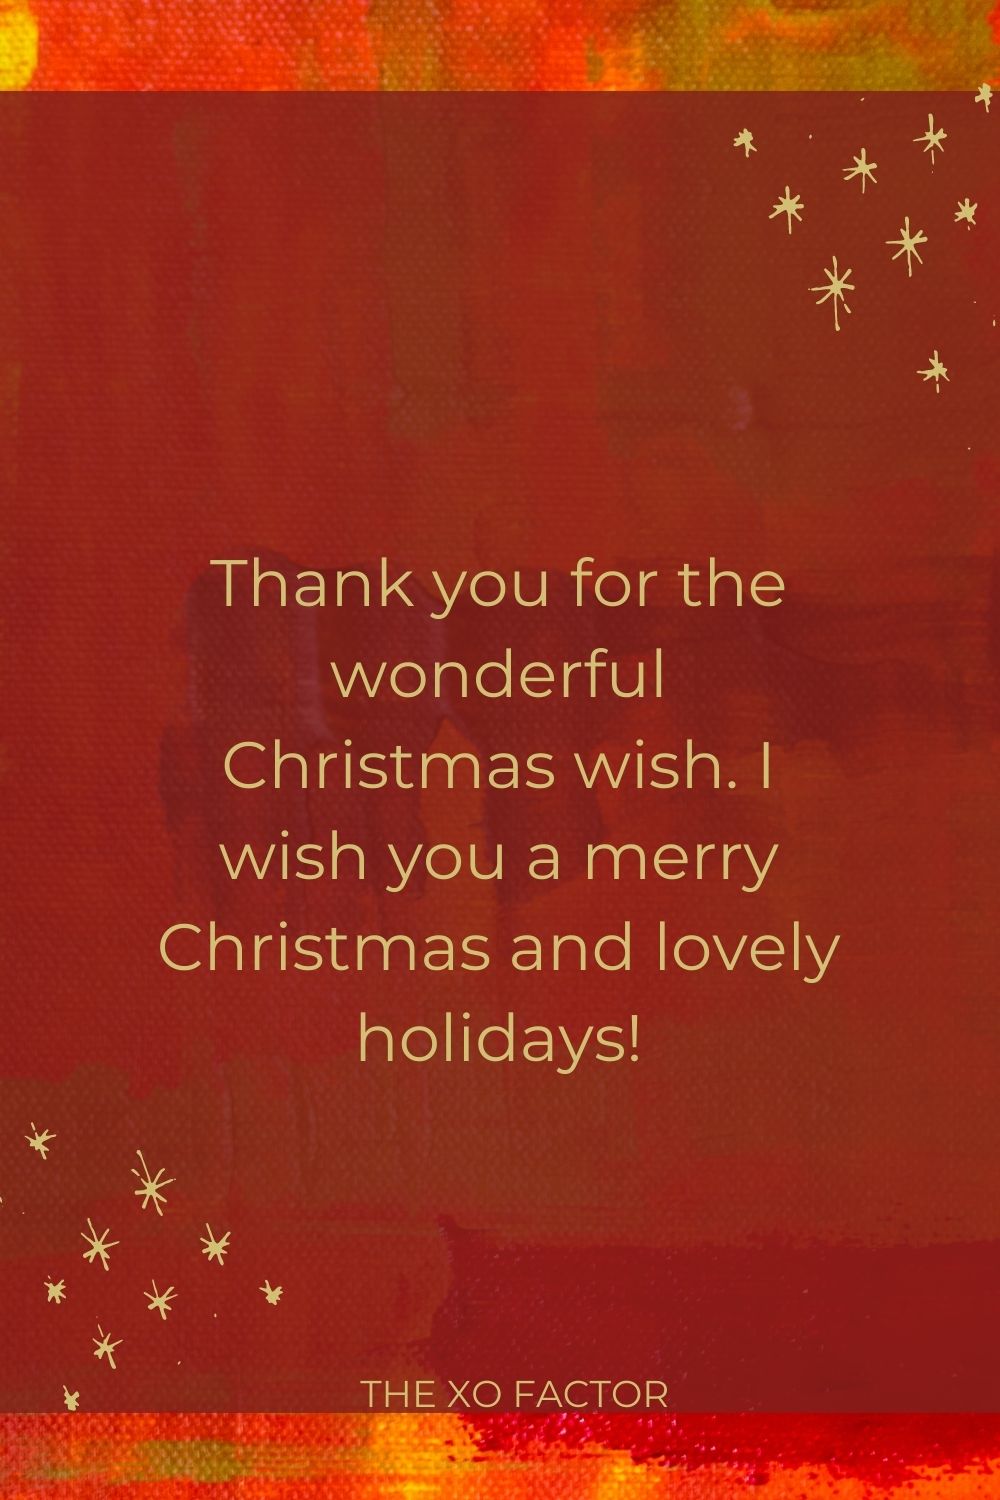 Thank you for the wonderful Christmas wish. I wish you a merry Christmas and lovely holidays!